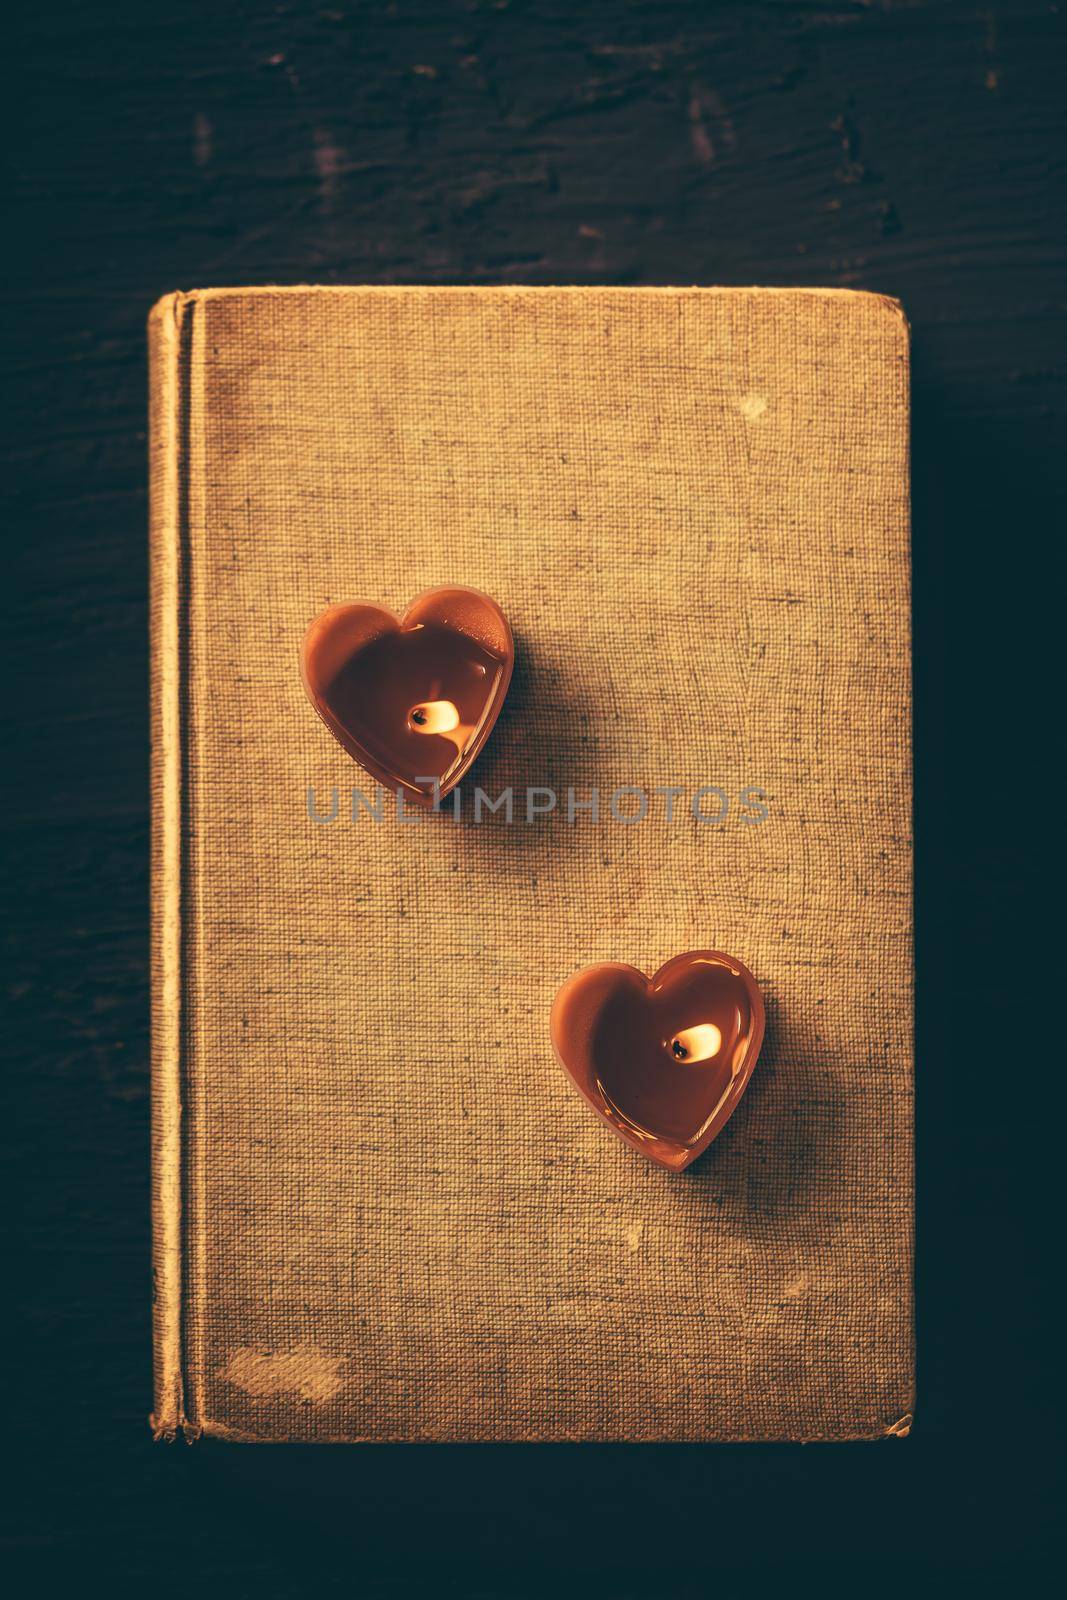 Couple heart is candles on old book, Vintage dark filter